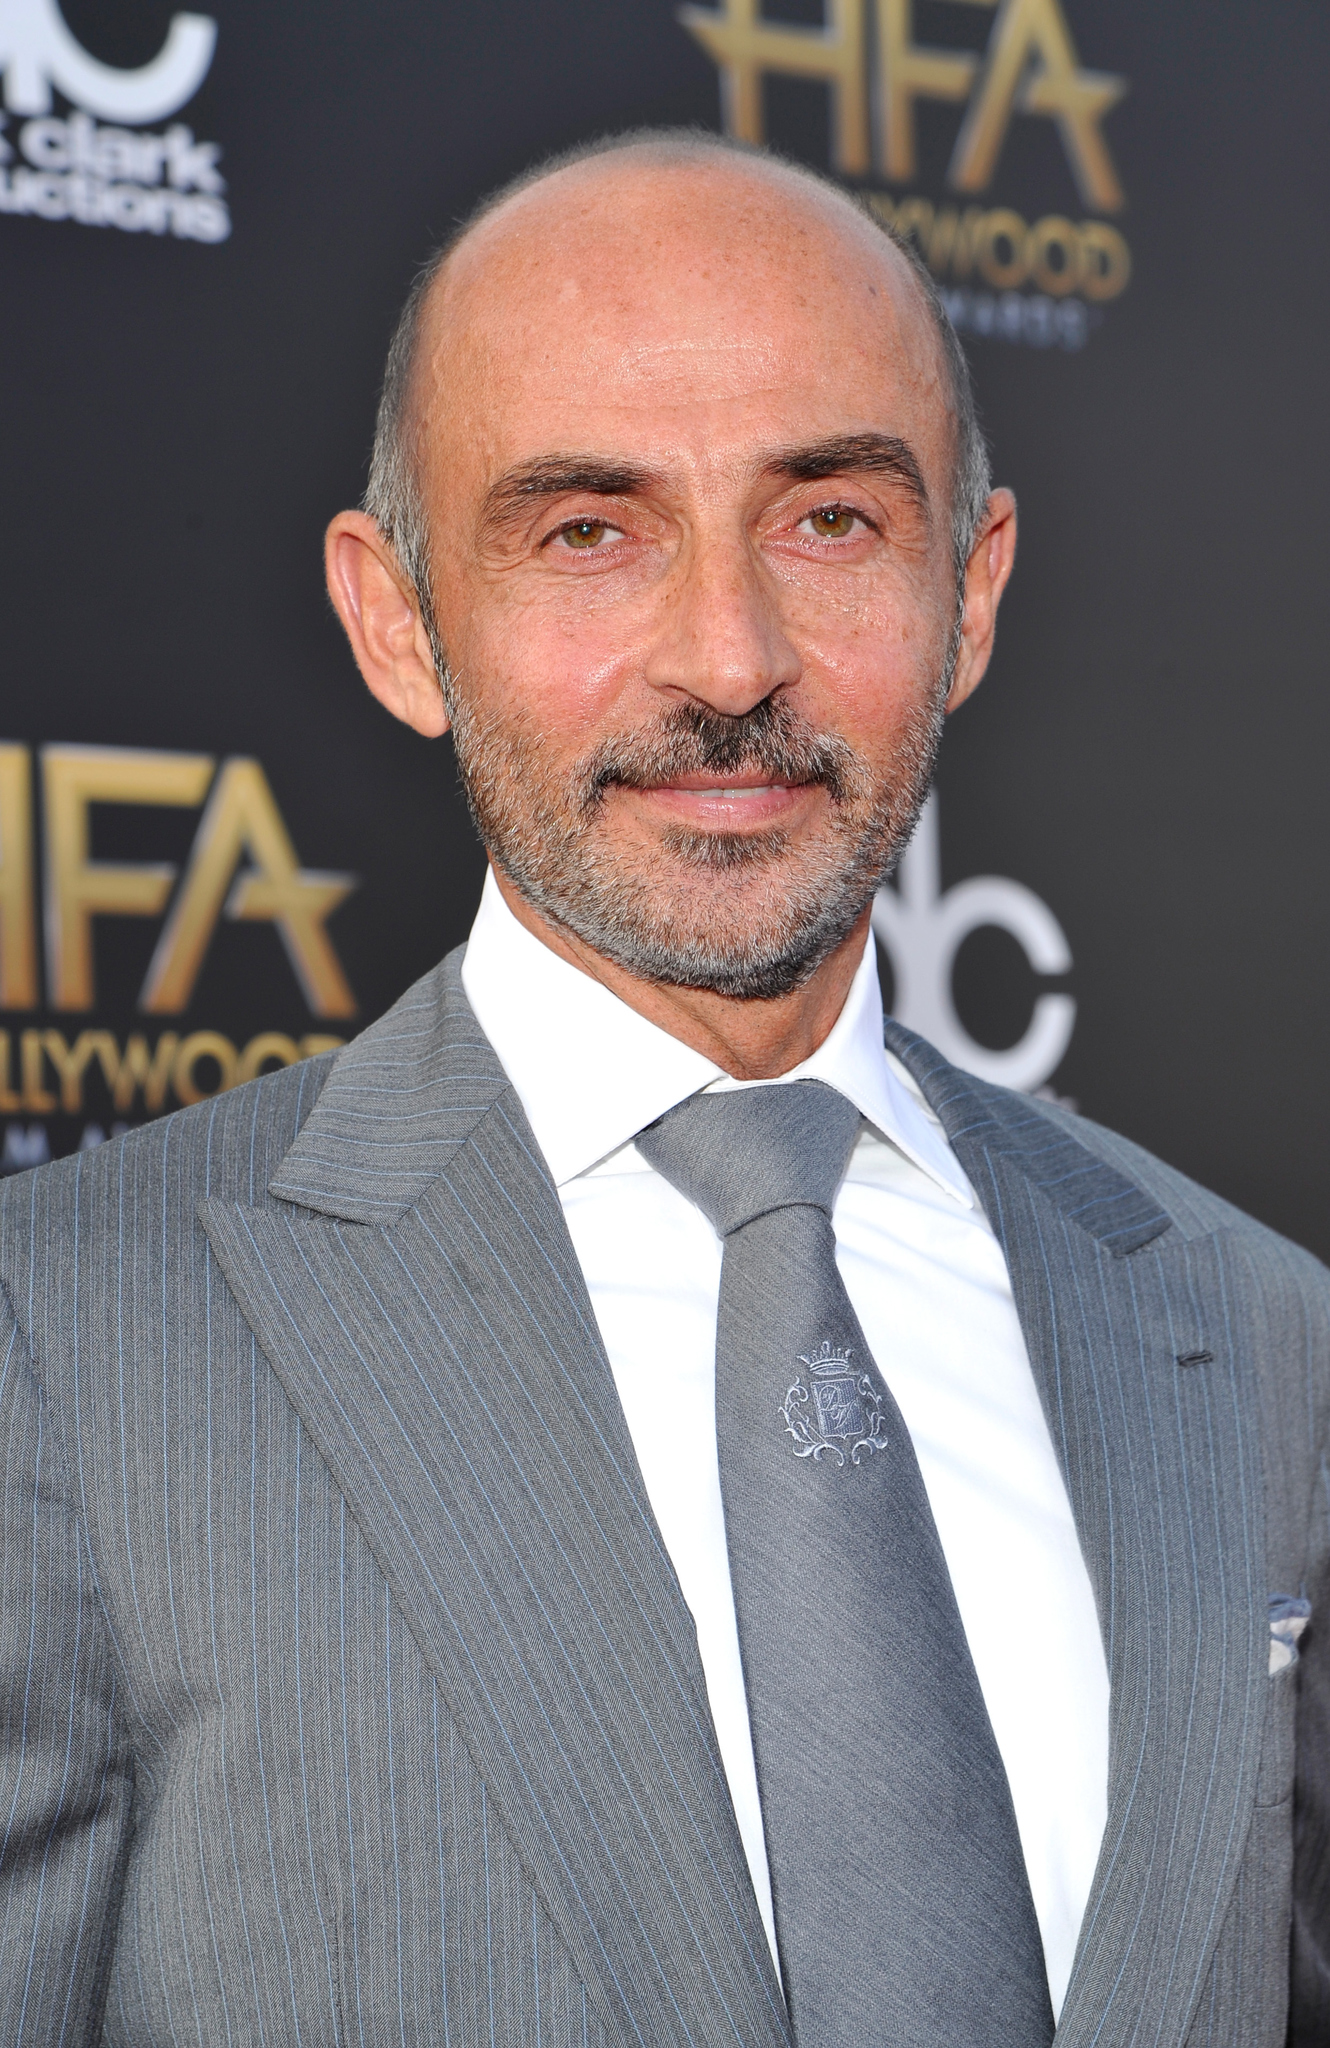 Shaun Toub at event of Hollywood Film Awards (2014)